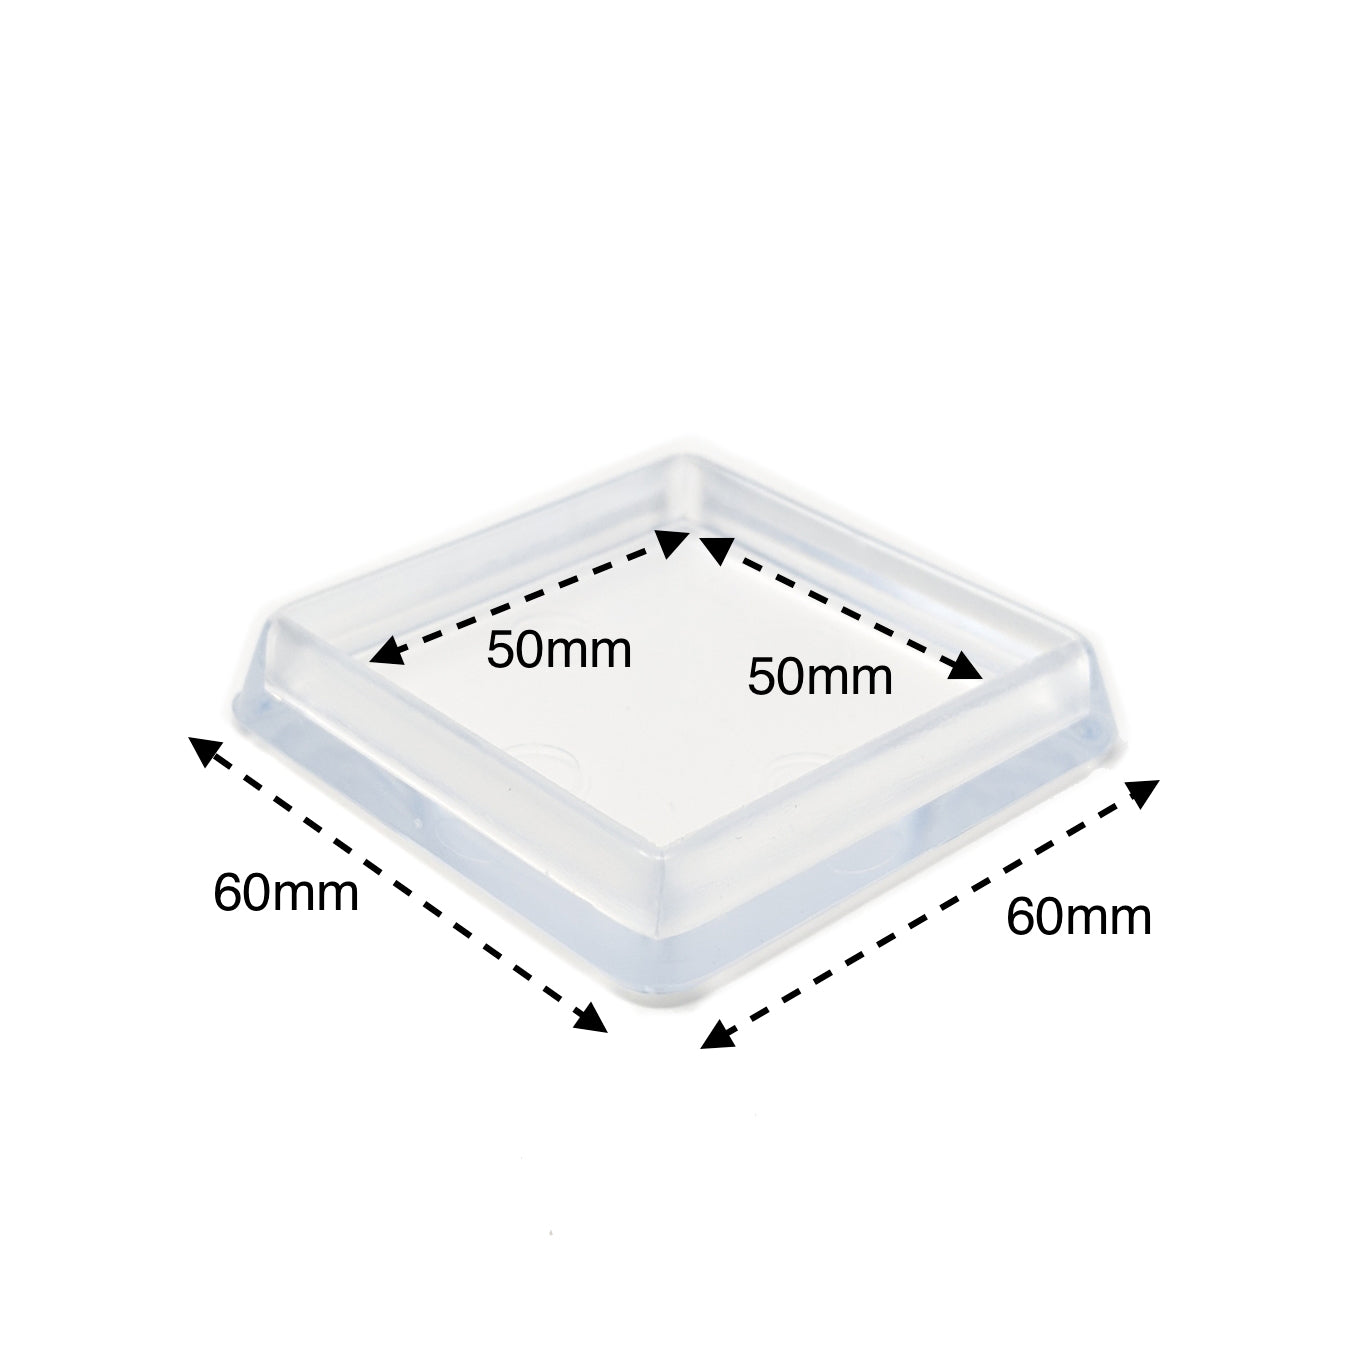 50x50mm Clear Square Furniture Leg Cups Floor Carpet Protector - Made in Germany - Keay Vital Parts